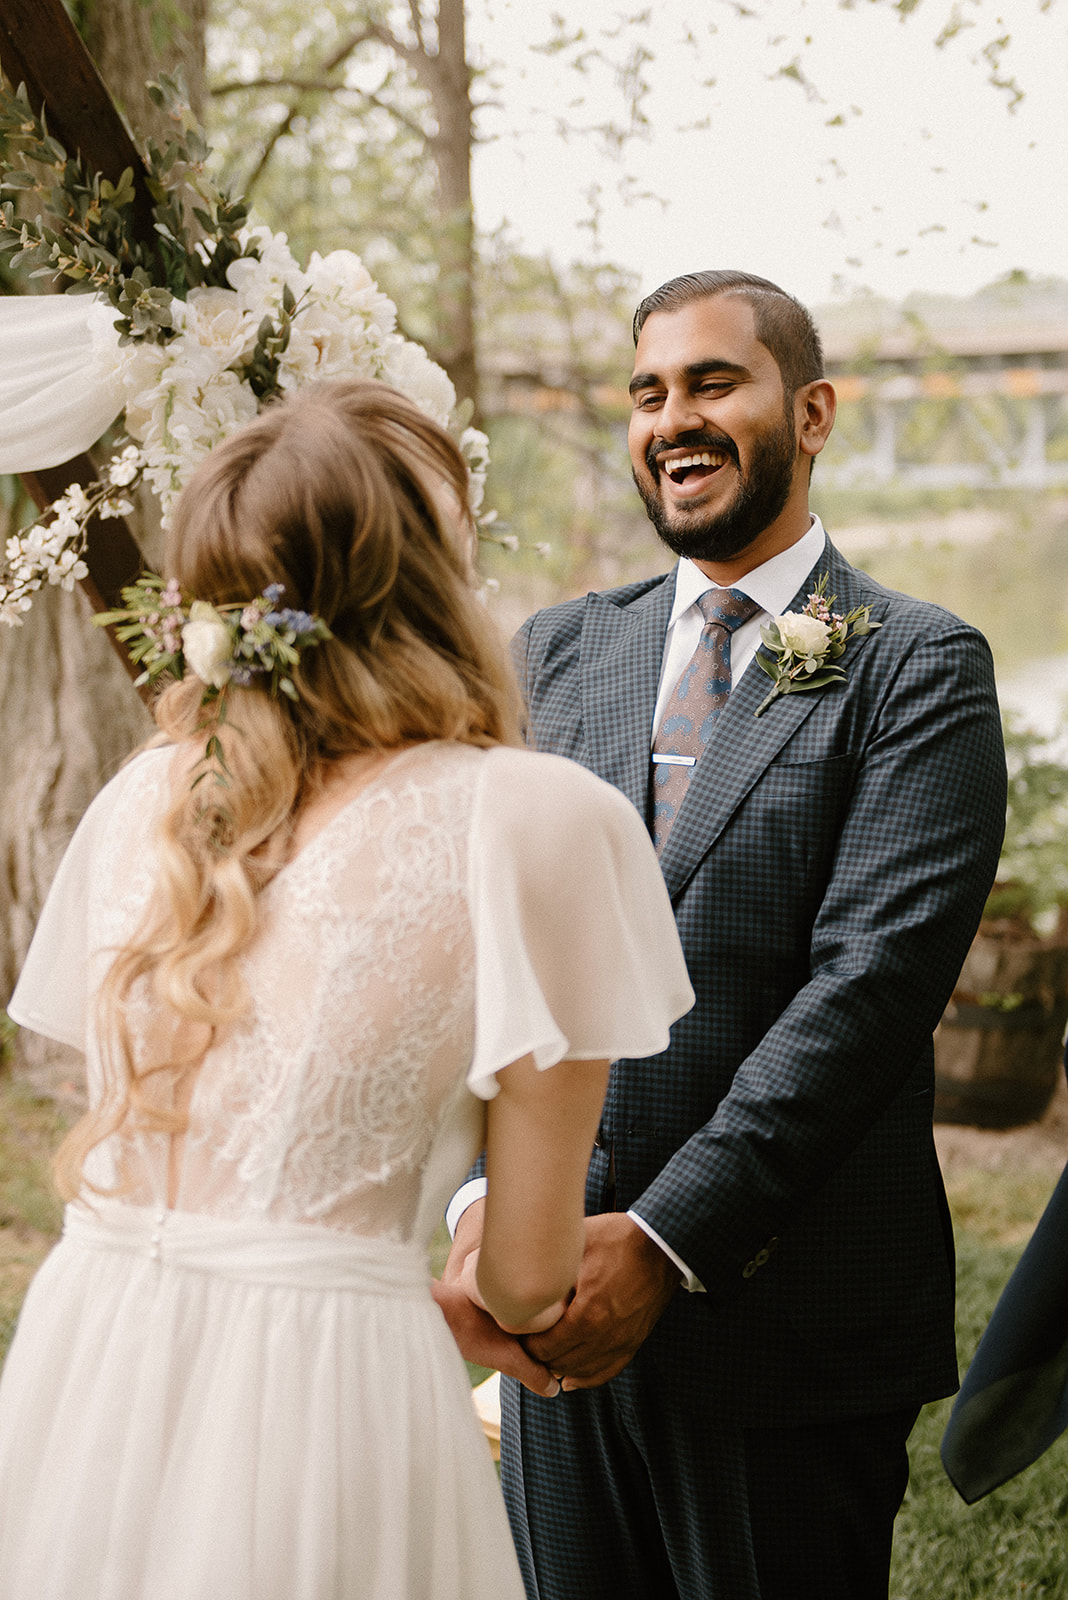 Joyful bridal couple exchanging vows under a floral arch in Montreal, with the bride's intricate lace dress and natural hairstyle highlighted by the soft daylight.